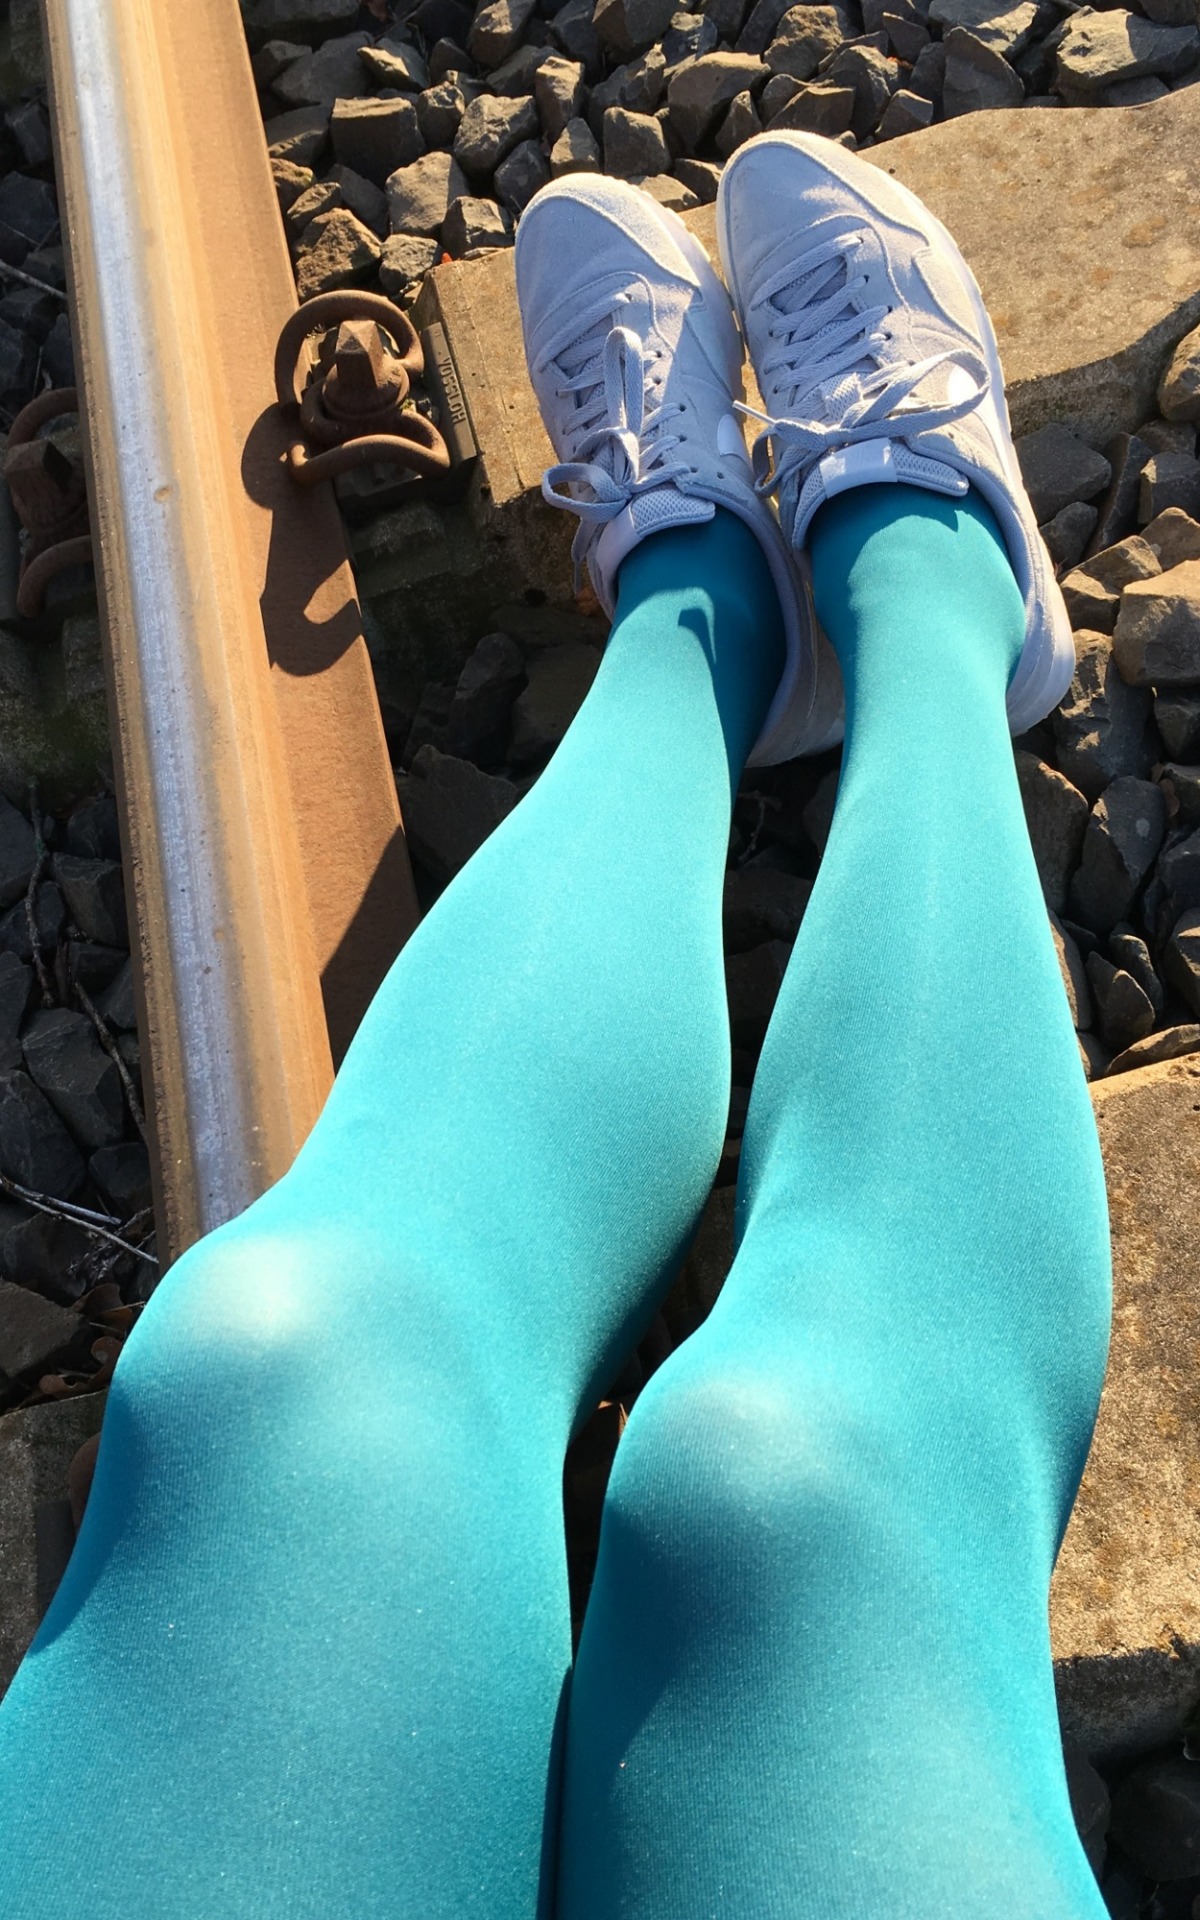 rfwka:   “Calzedonia - Soft Touch” in turquoise …  Interesting how different